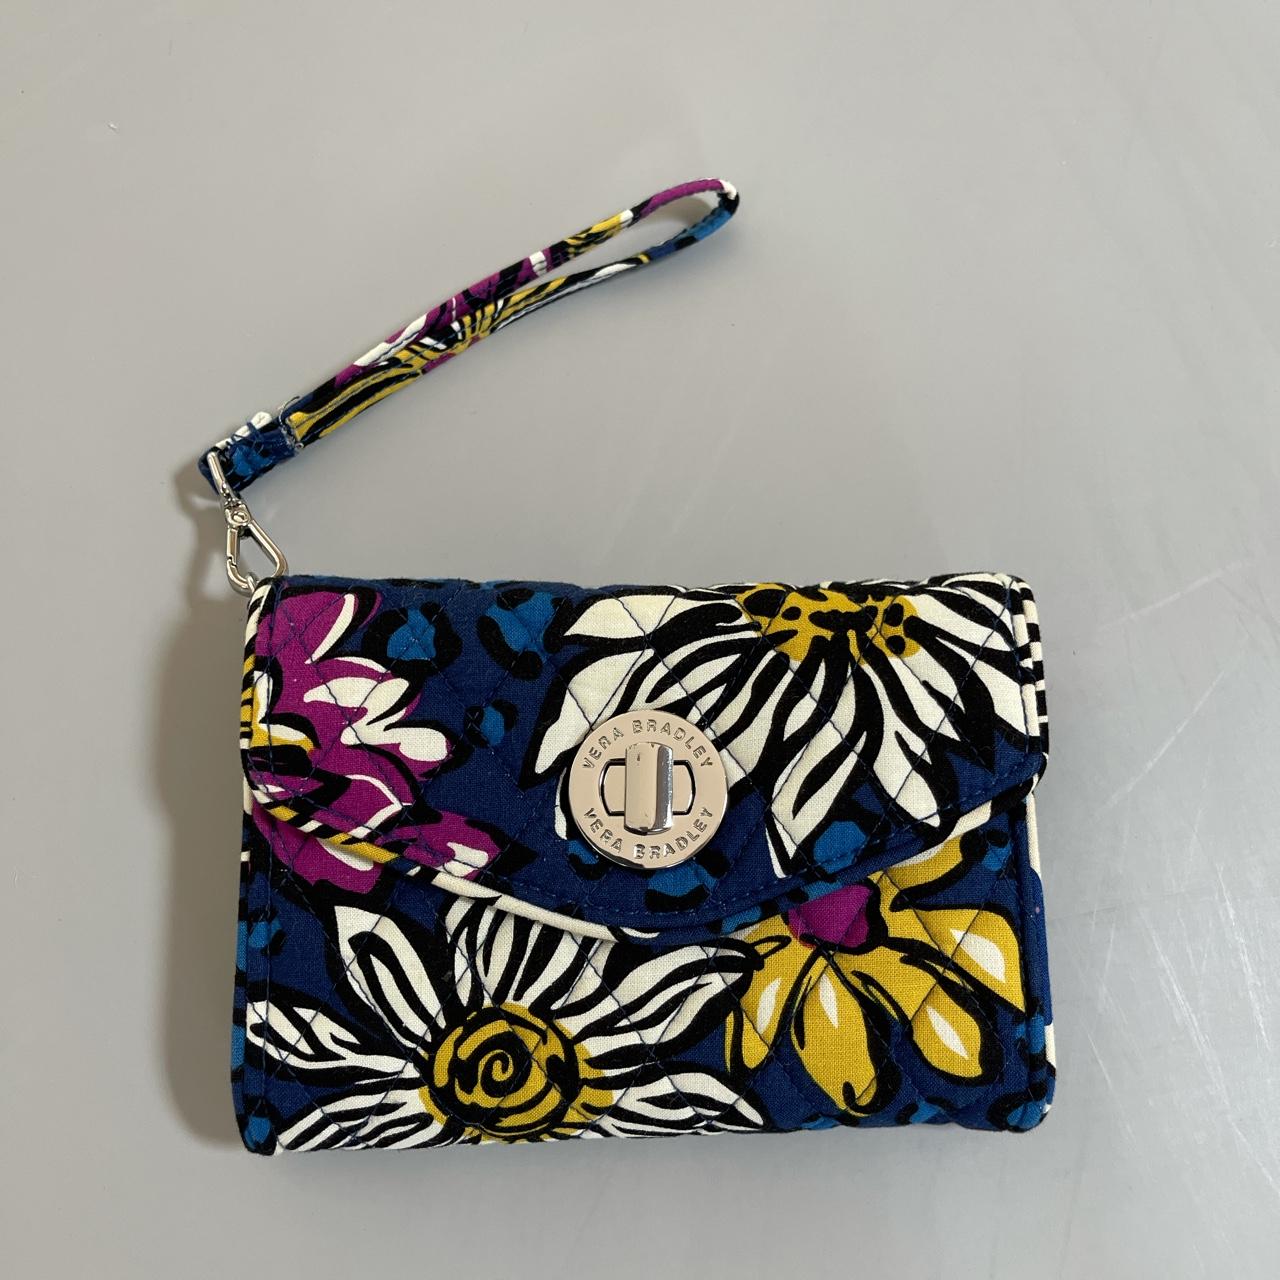 Vera Bradley Purse Wallet - $13 (67% Off Retail) - From Kendall